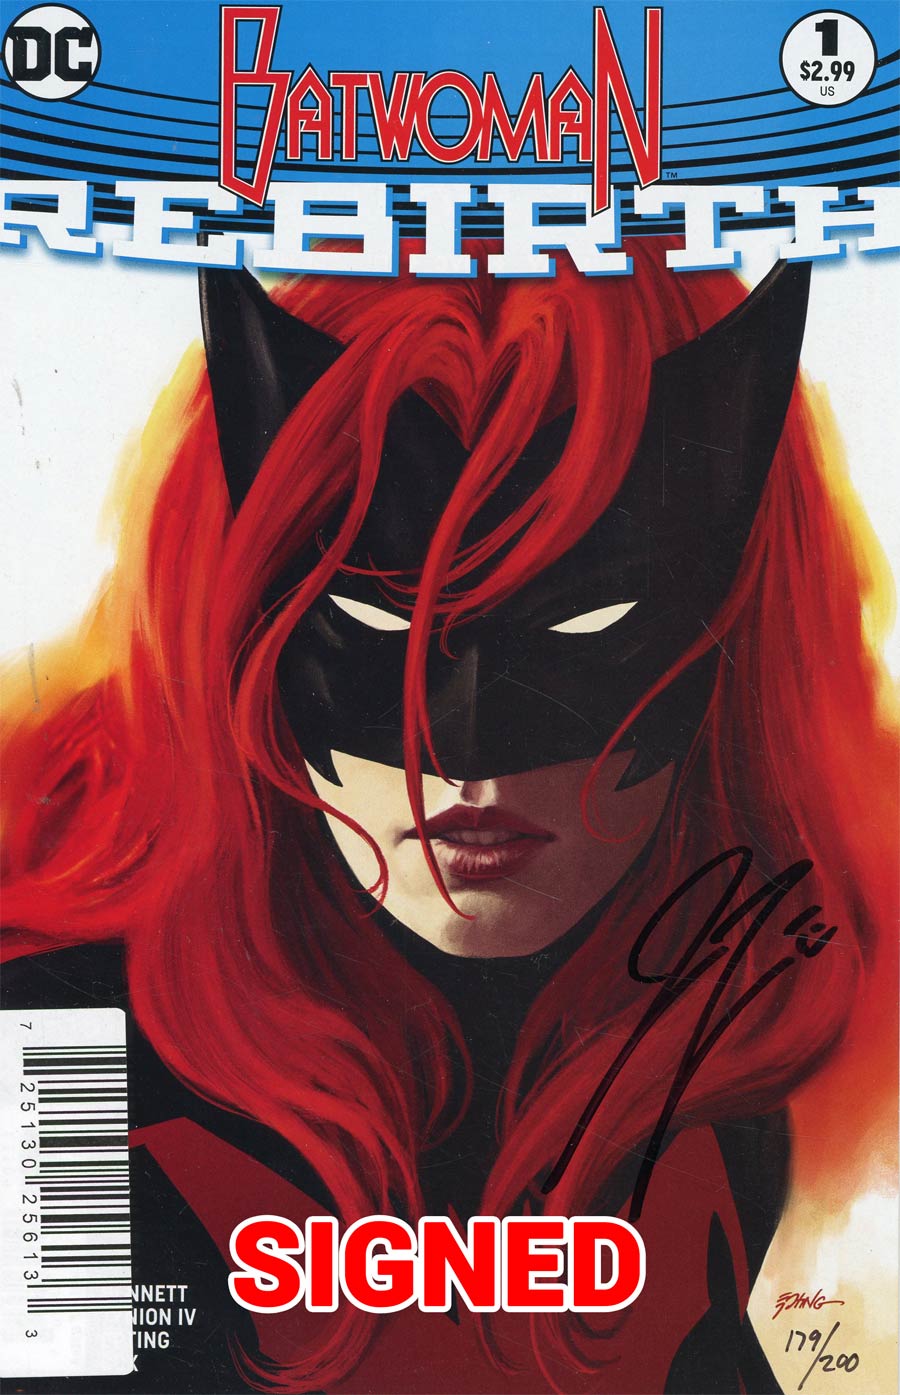 Batwoman Vol 2 #1 Cover E DF Ultra-Limited Silver Signature Series Signed By James Tynion IV